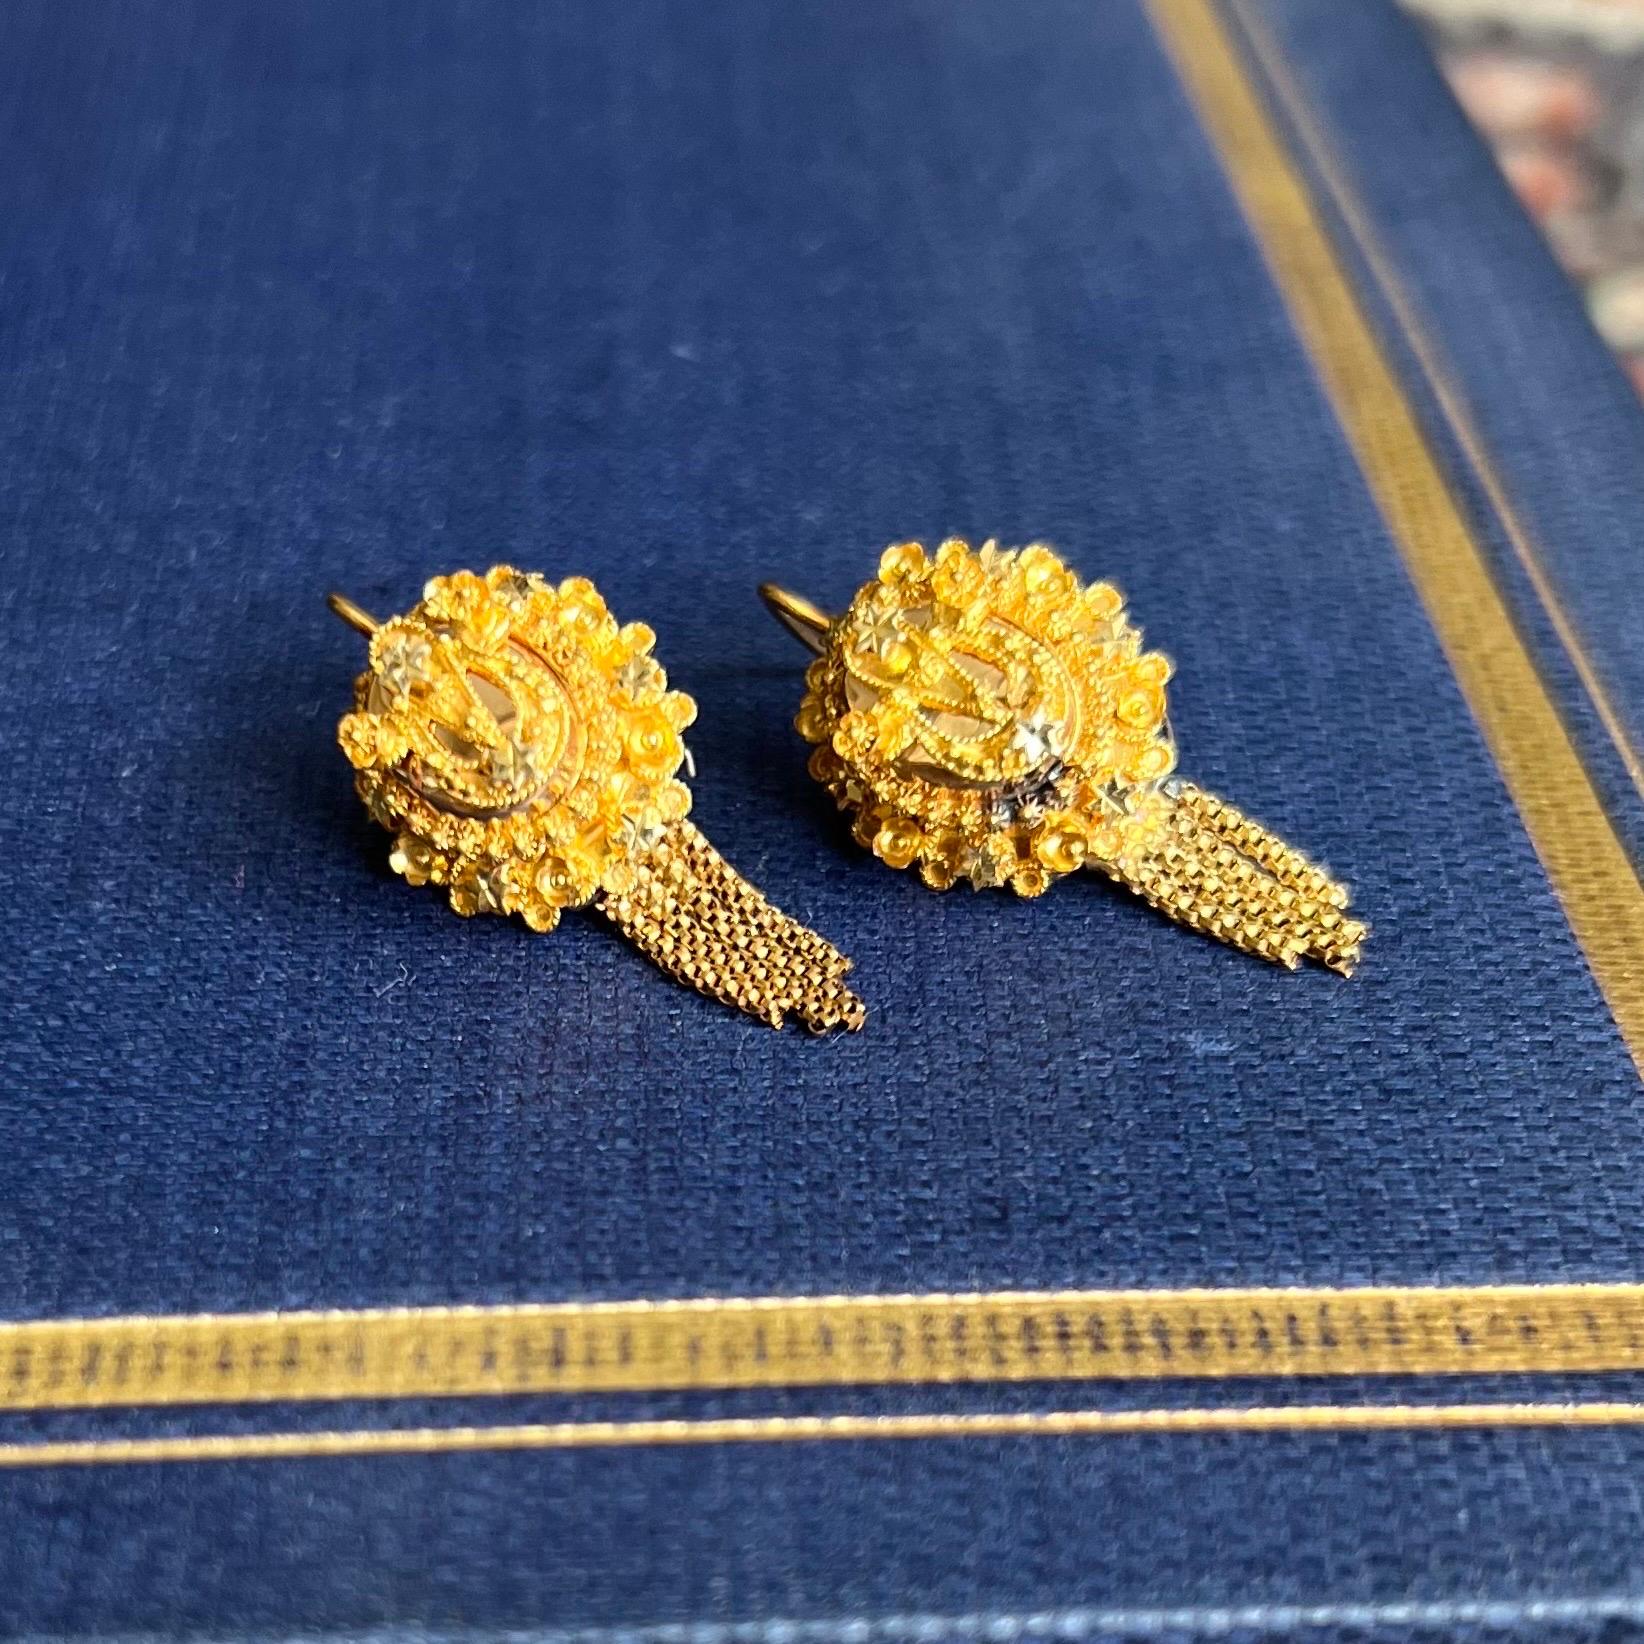 These antique 14 karat yellow gold drop earrings are created with fine cannetille work and dangling tassels. The earrings are very well made by hand with cannetille. Each earring has four tassels below the top, which characterizes these beautiful